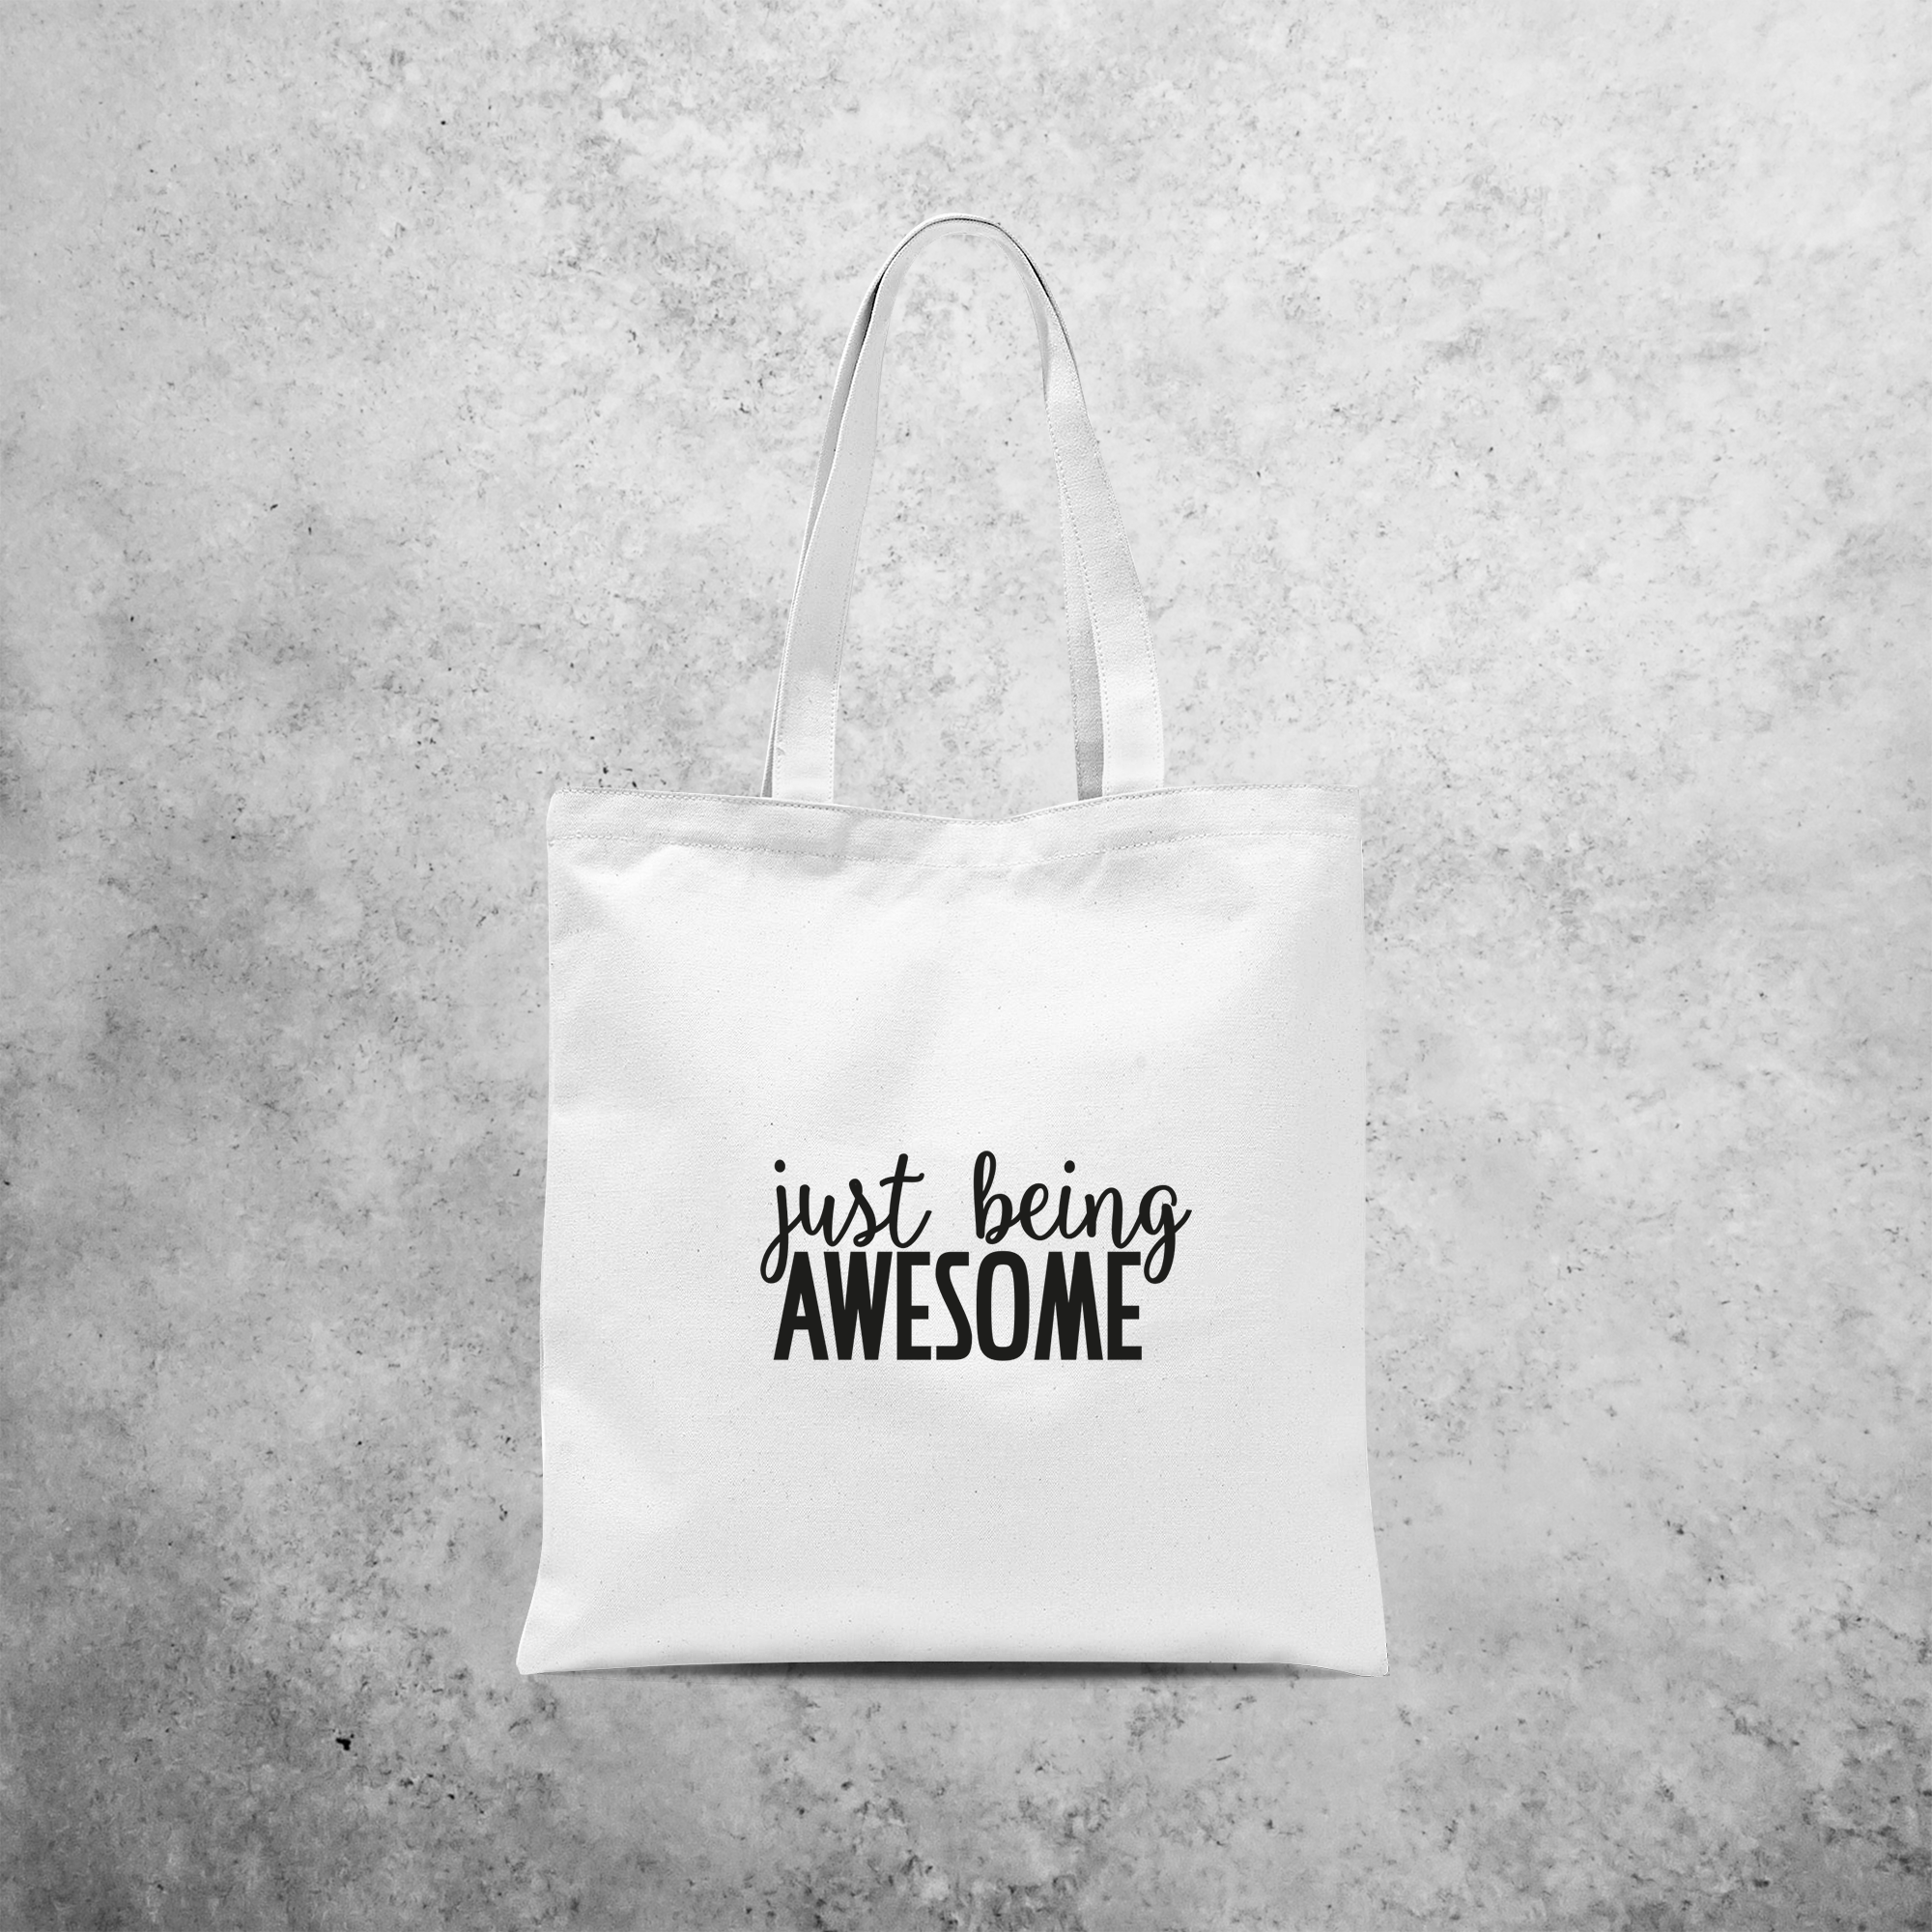 'Just being awesome' tote bag